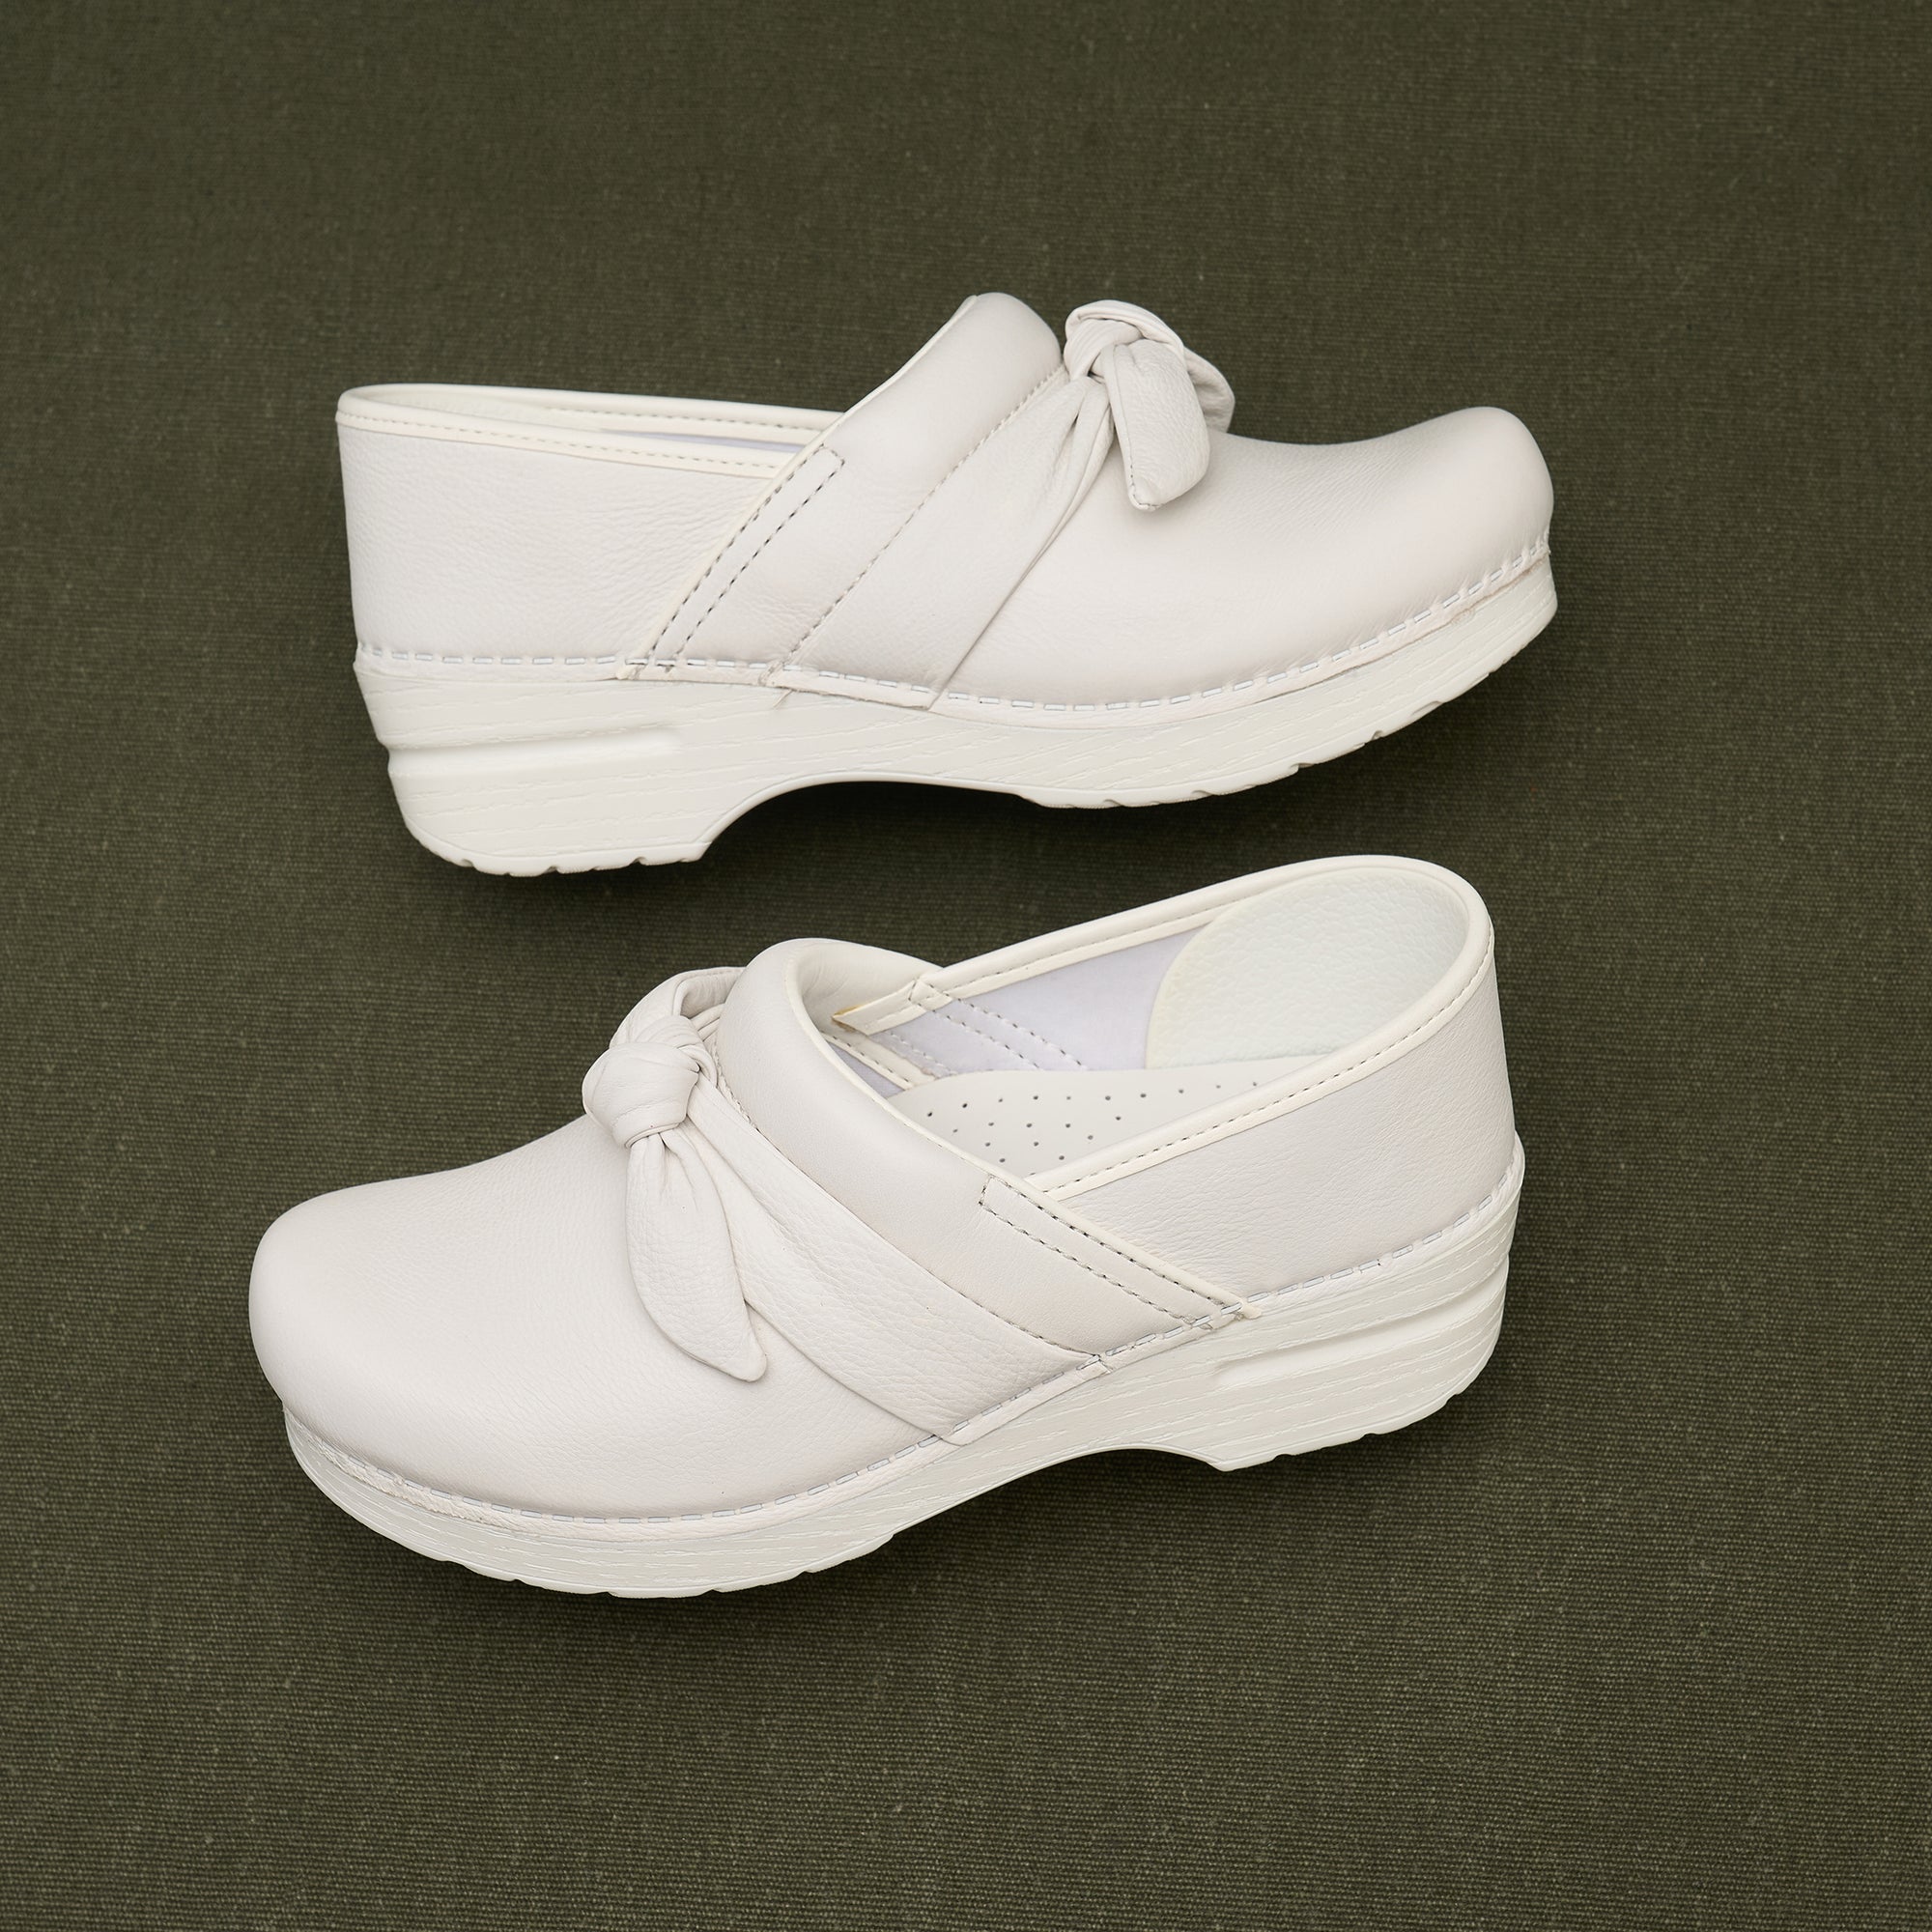 White clogs with a bow detail.